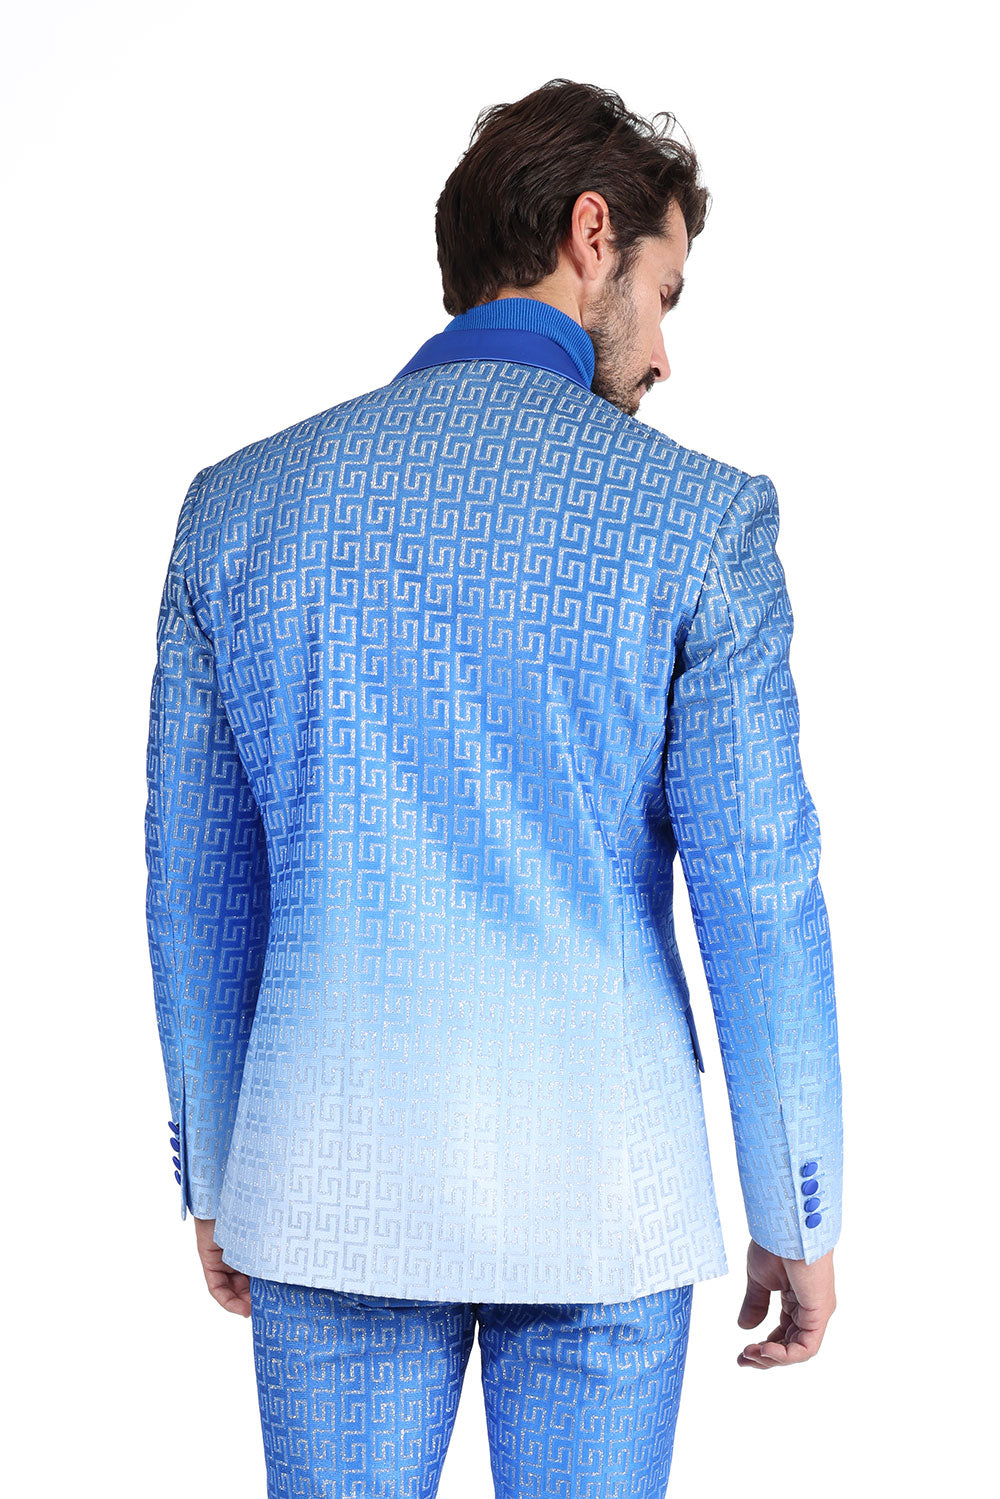 A stylish high school student wearing KCT Menswear's Dazzling Prom Blazer, showcasing its stunning two-tone blue and silver fading effect, and sparkling rhinestone Greek key pattern on collar and pockets - perfect for a memorable prom night.